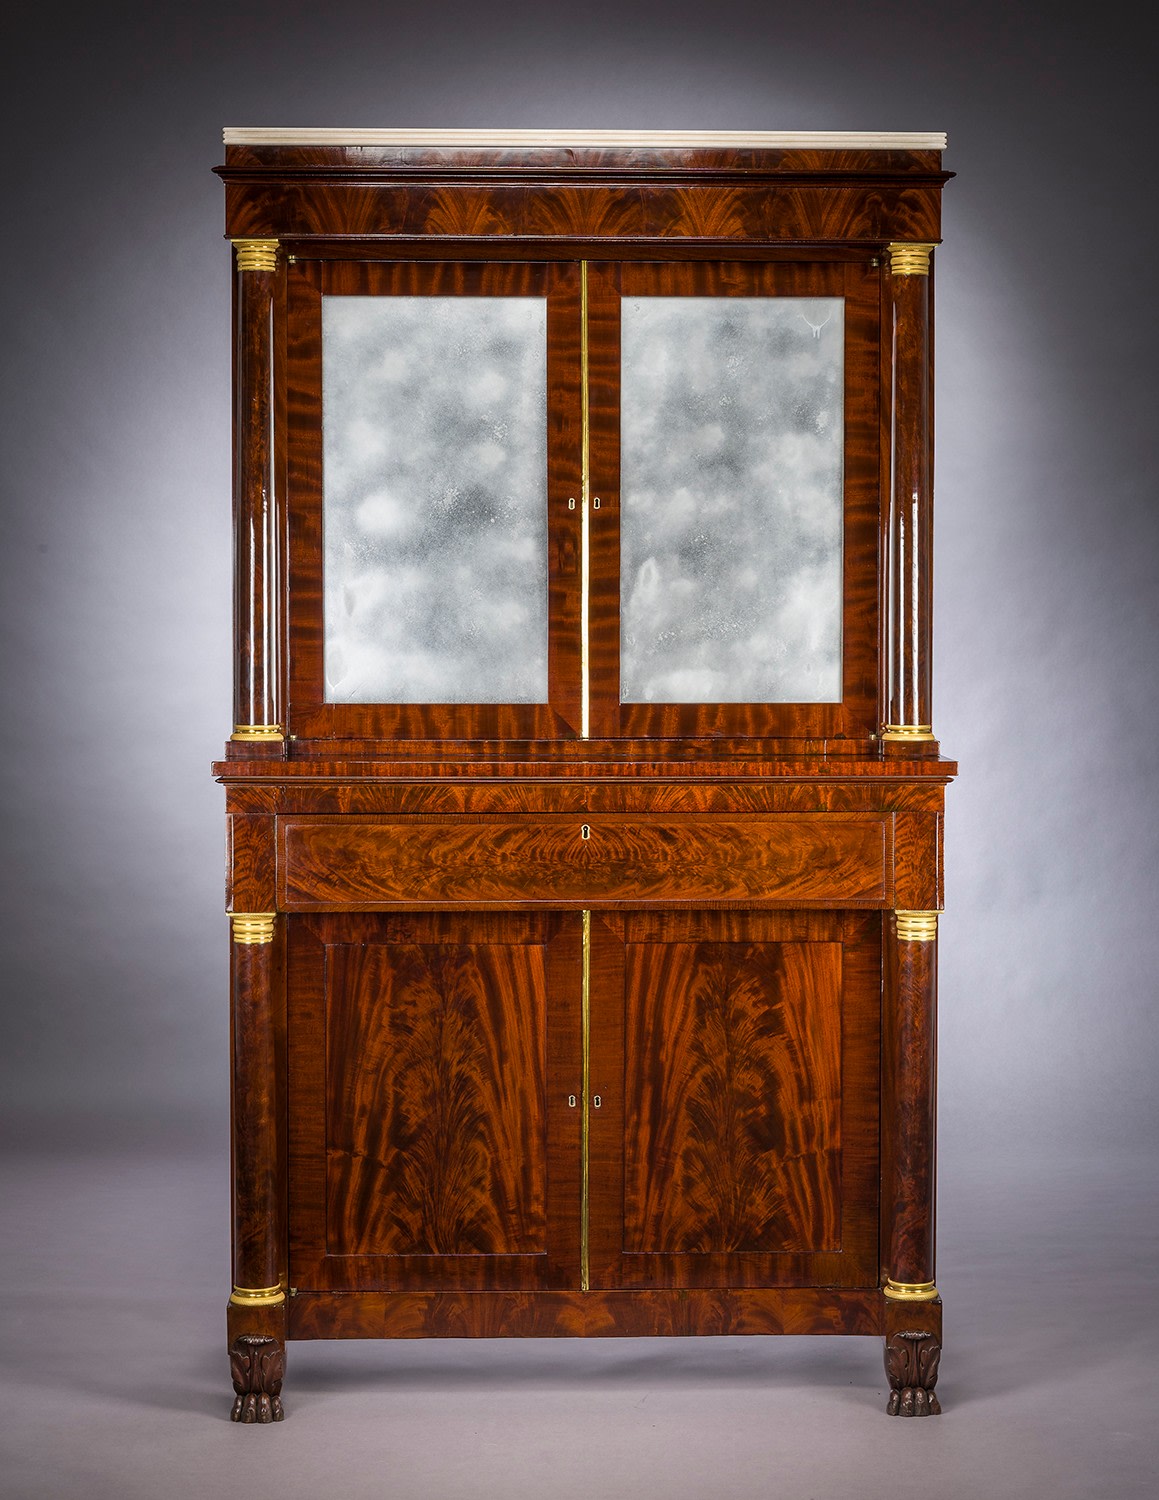 Cabinet with Mirrored Doors, about 1820. Attributed to Duncan Phyfe (1770&ndash;1854), New York. Mahogany, with ormolu capitals and bases, gilt-brass door moldings, keyhole liners, and knobs, marble, and mirror plate 78 5/8 in. high, 35 in. wide, 22 in. deep (overall). Frontal view.